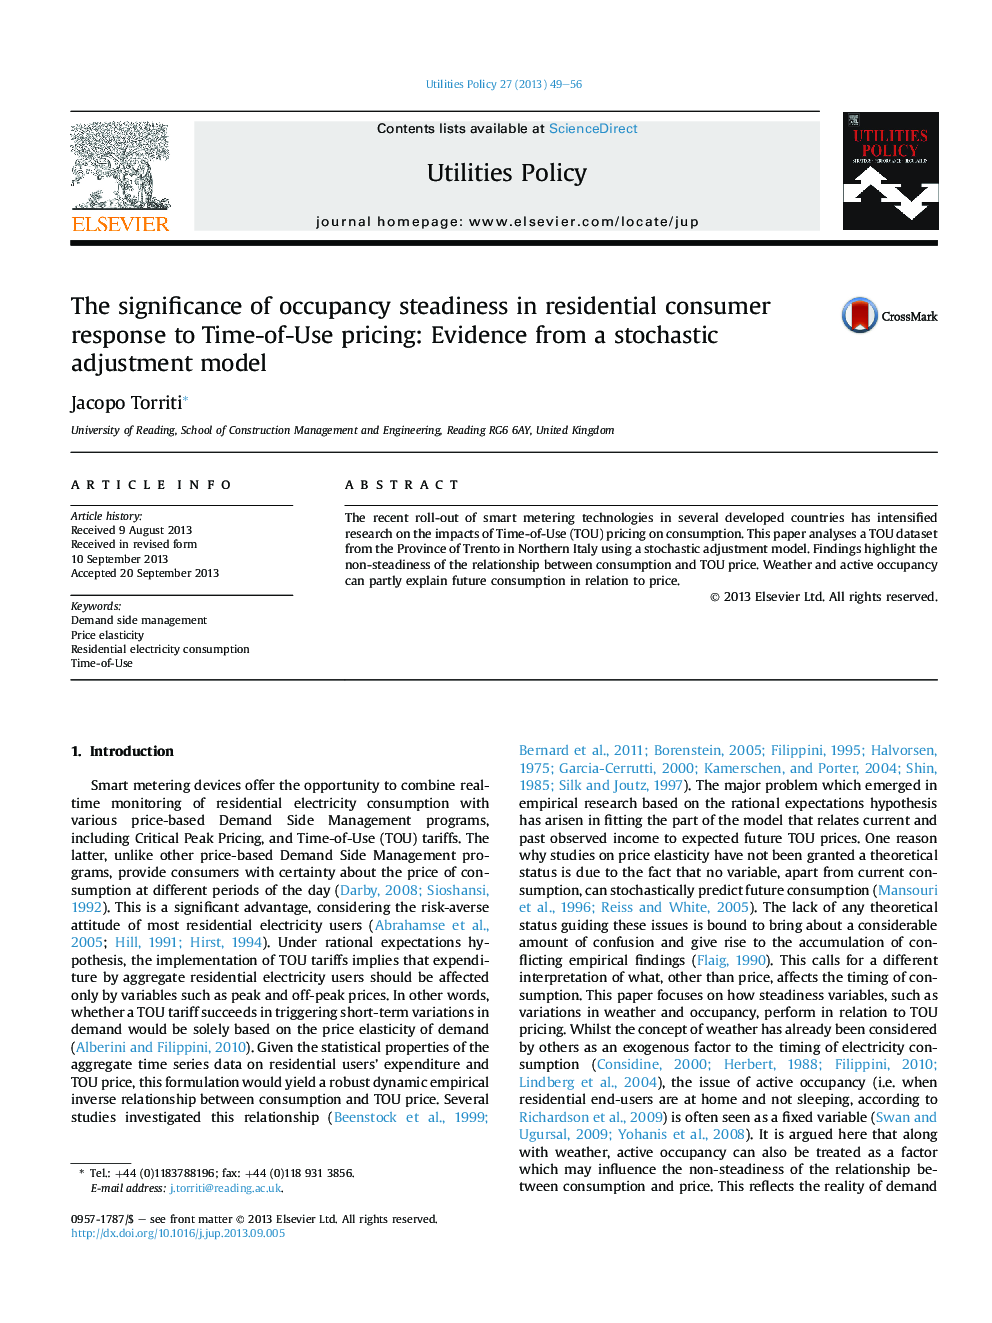 The significance of occupancy steadiness in residential consumer response to Time-of-Use pricing: Evidence from a stochastic adjustment model